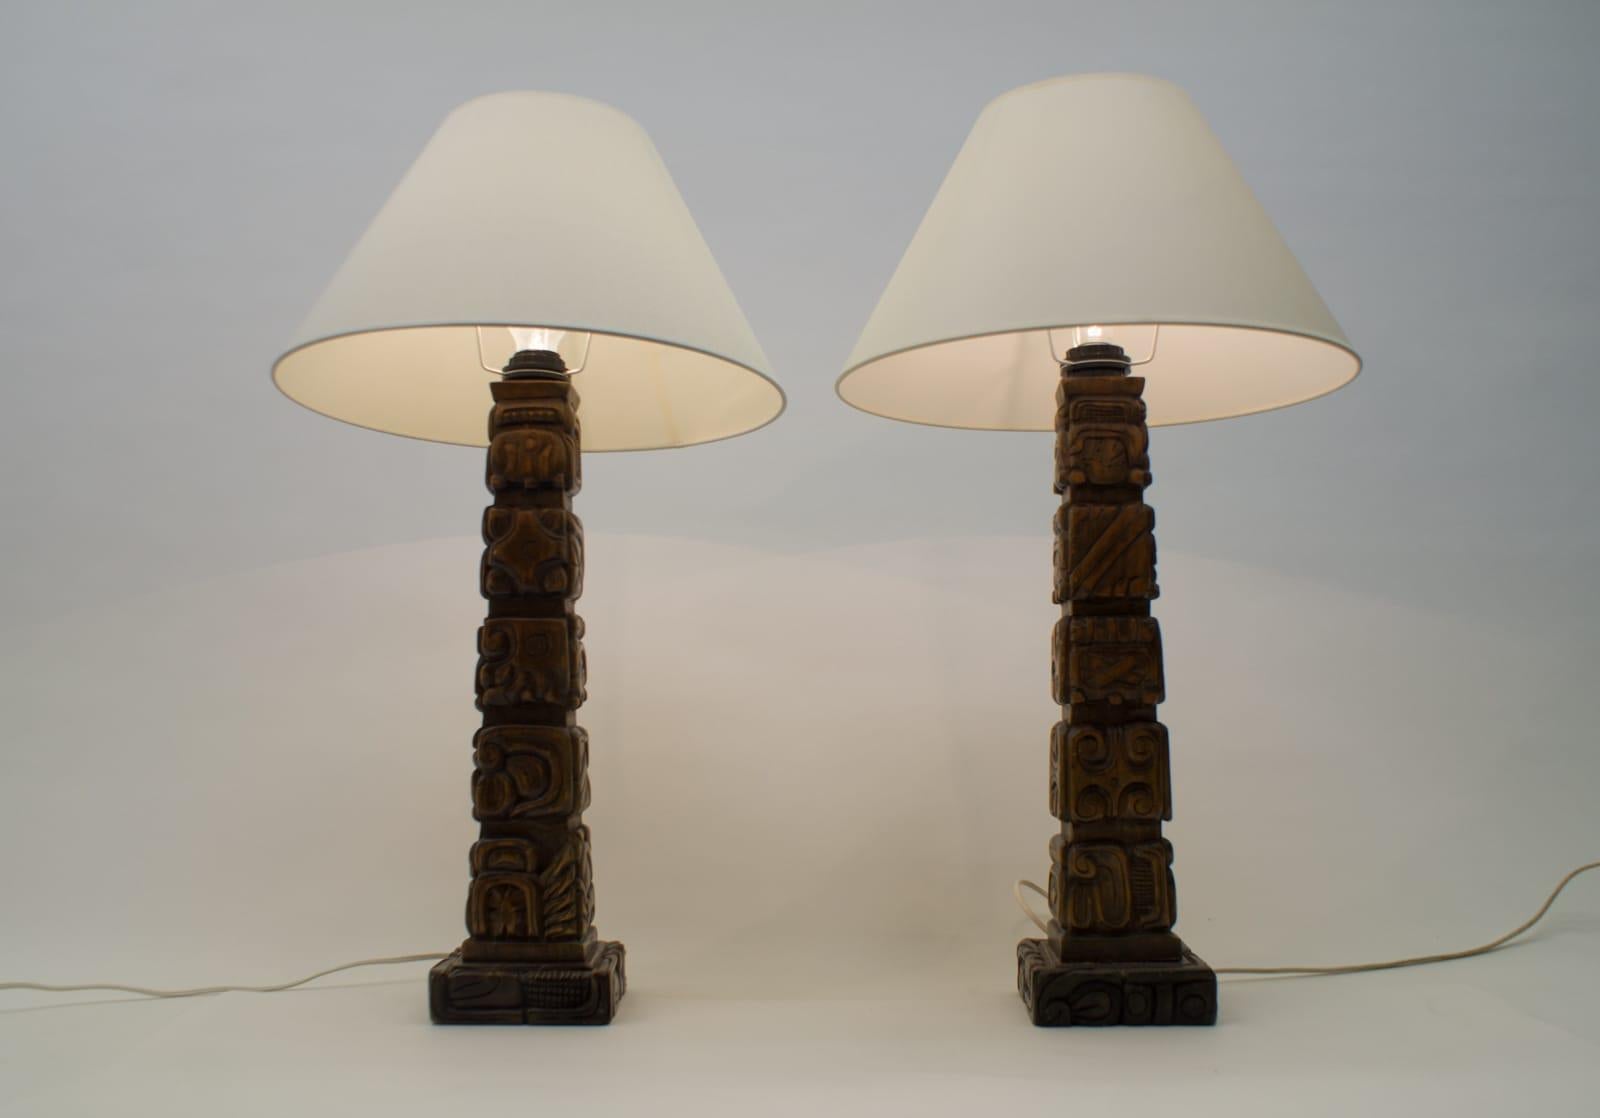 Pair of rare wooden table lamps from Temde, Switzerland 1960s .

Hand carved in Honduras, made in Switzerland. 

The lamp with the shade shown here is 73cm high, the lamp base alone measures 54 cm.

The lamp is offered without the